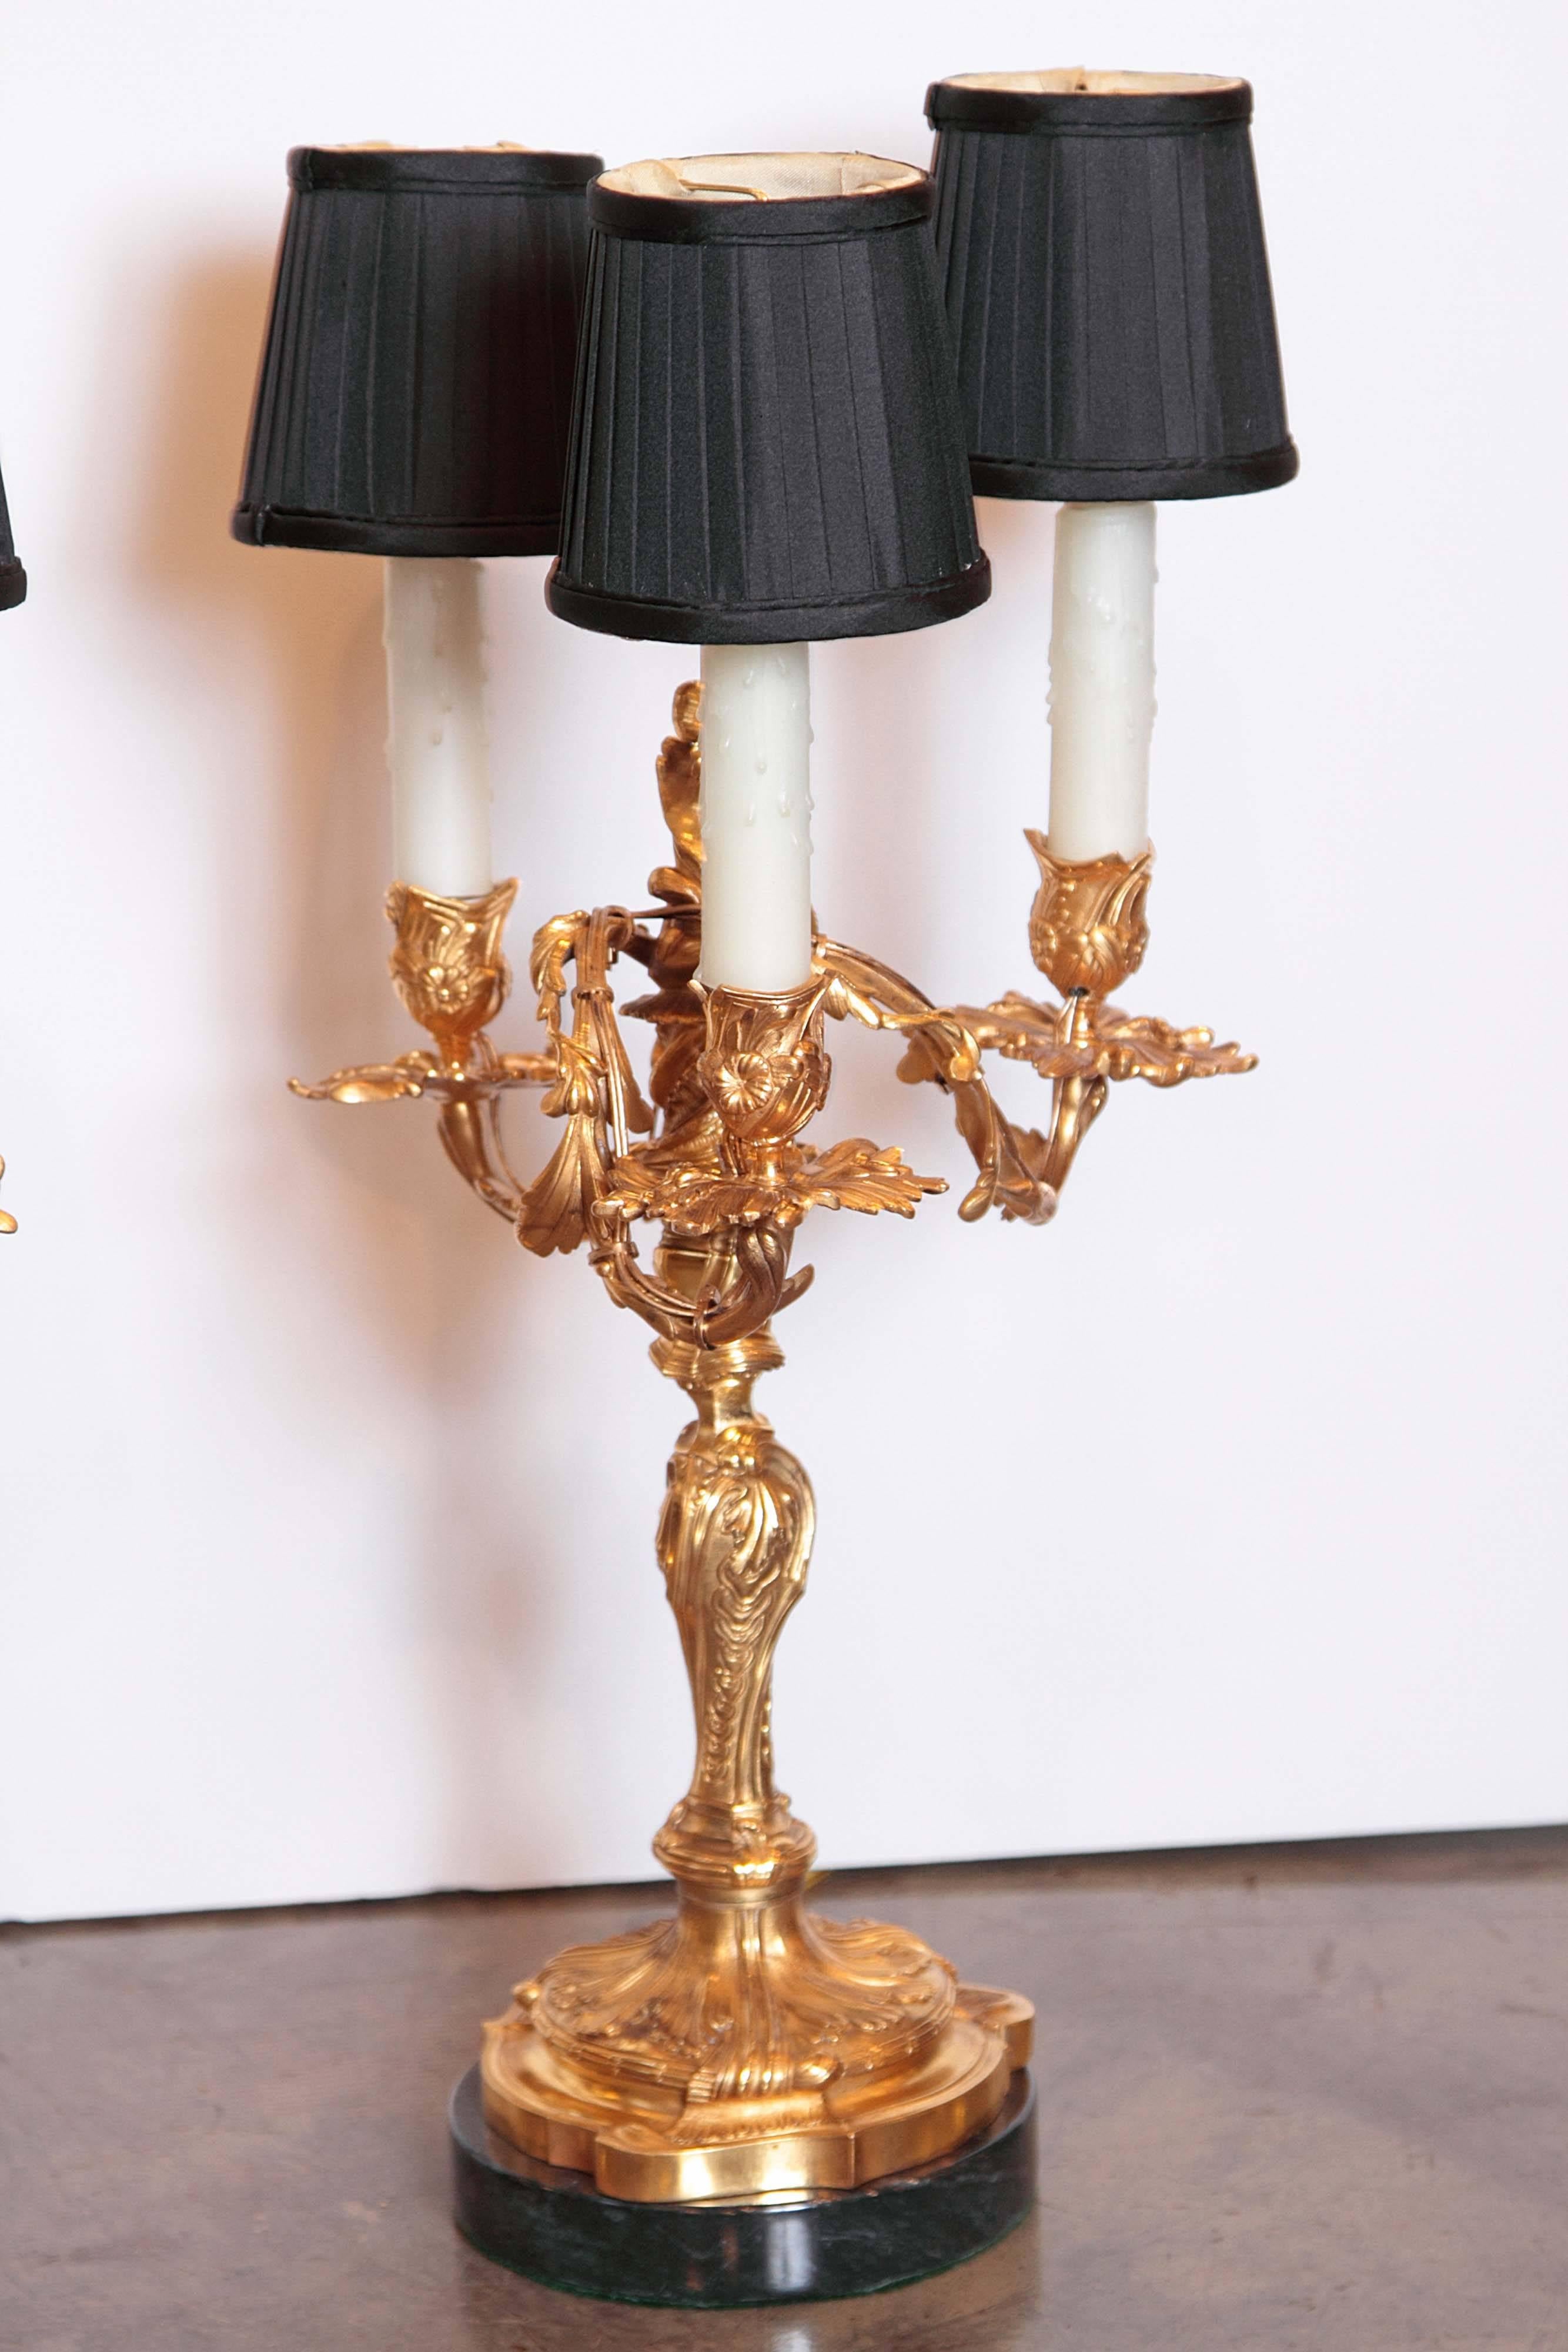 Pair of 19th century French Louis XV gilt bronze three-light candelabra lamps on marble bases signed in script on the base Henry Dasson, 1882.